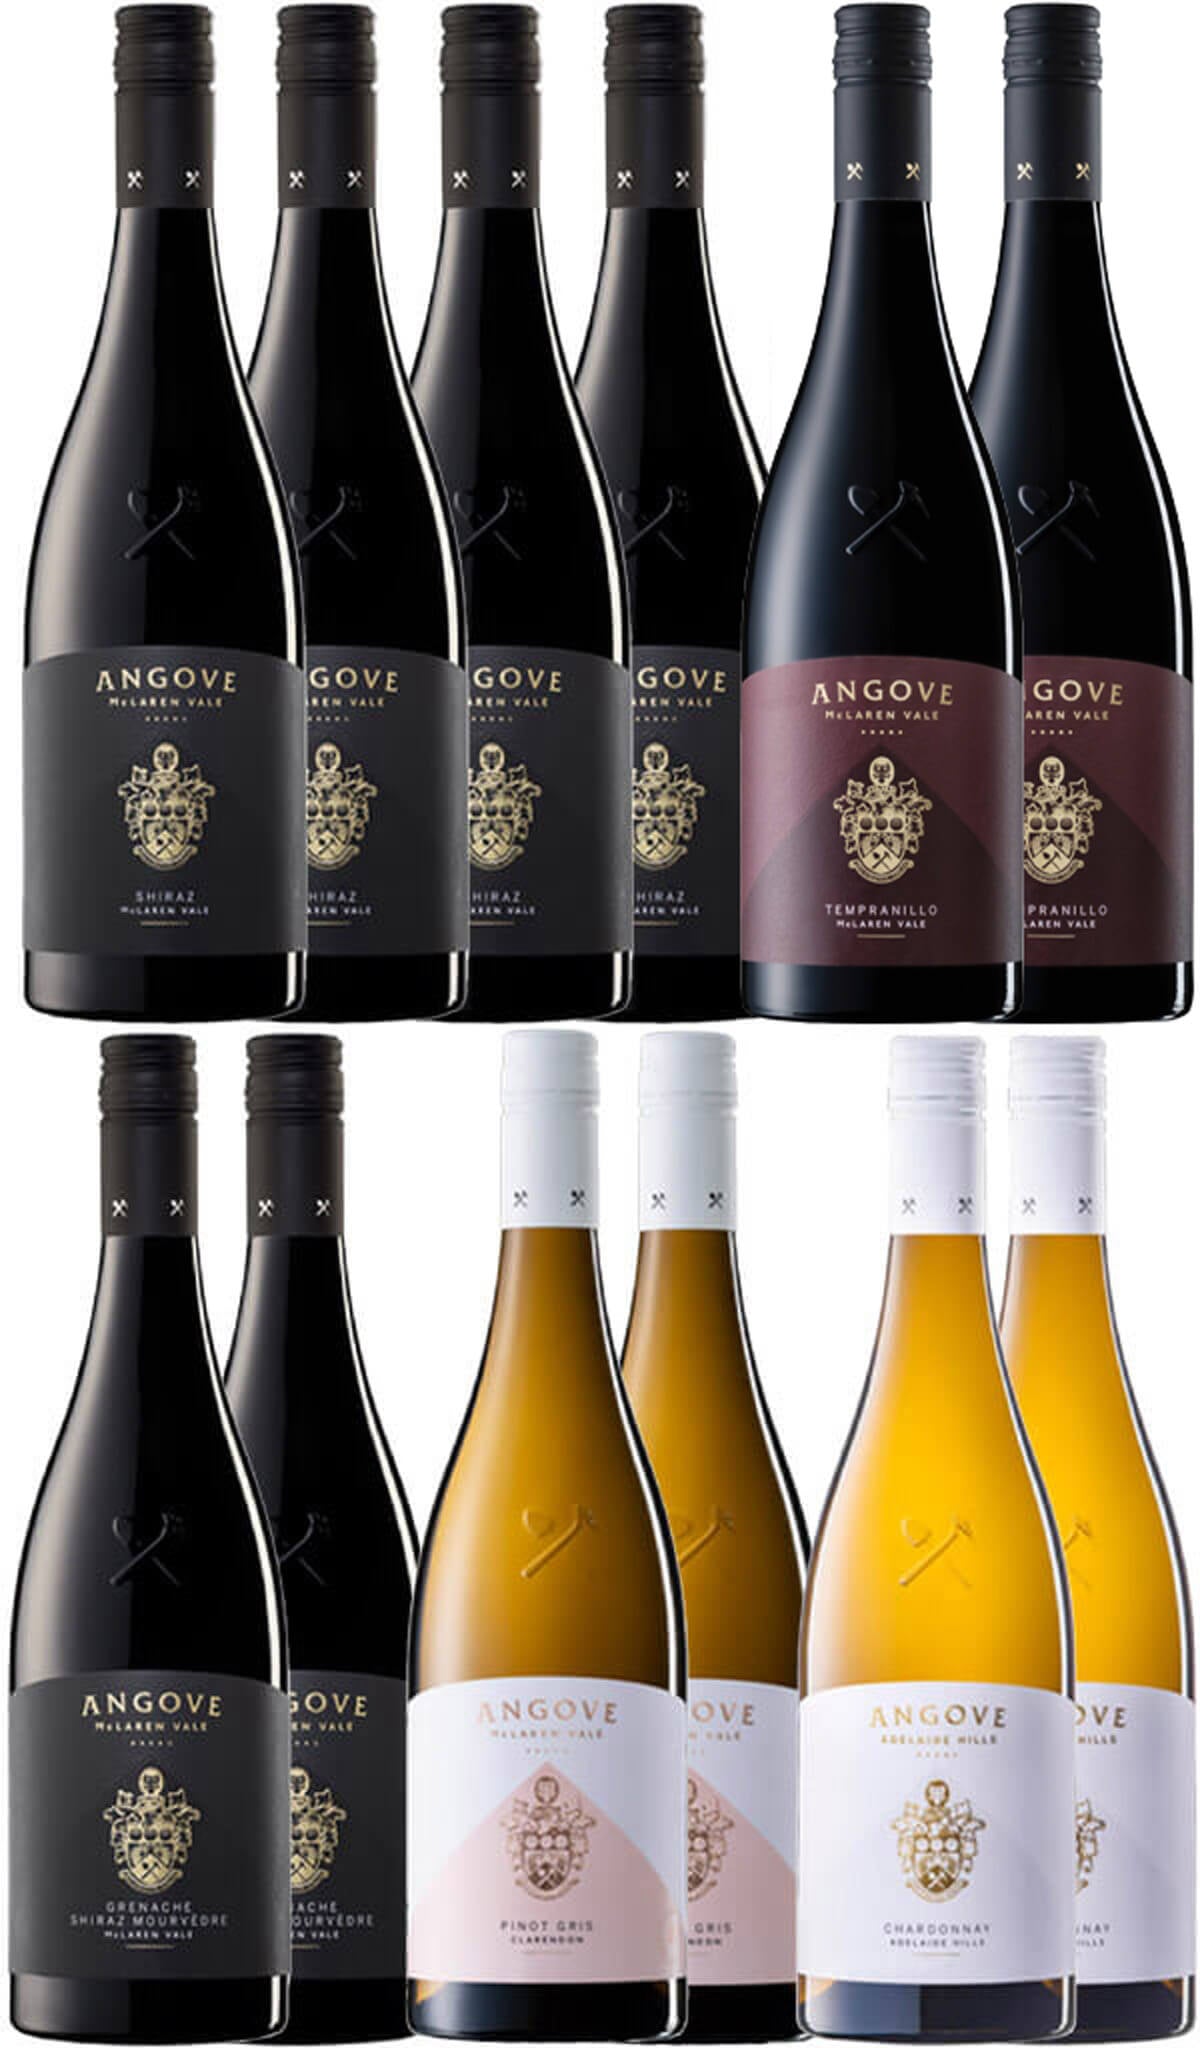 Find out more or buy Angove Family Crest Wines - Mixed Dozen Bundle online at Wine Sellers Direct - Australia’s independent liquor specialists.